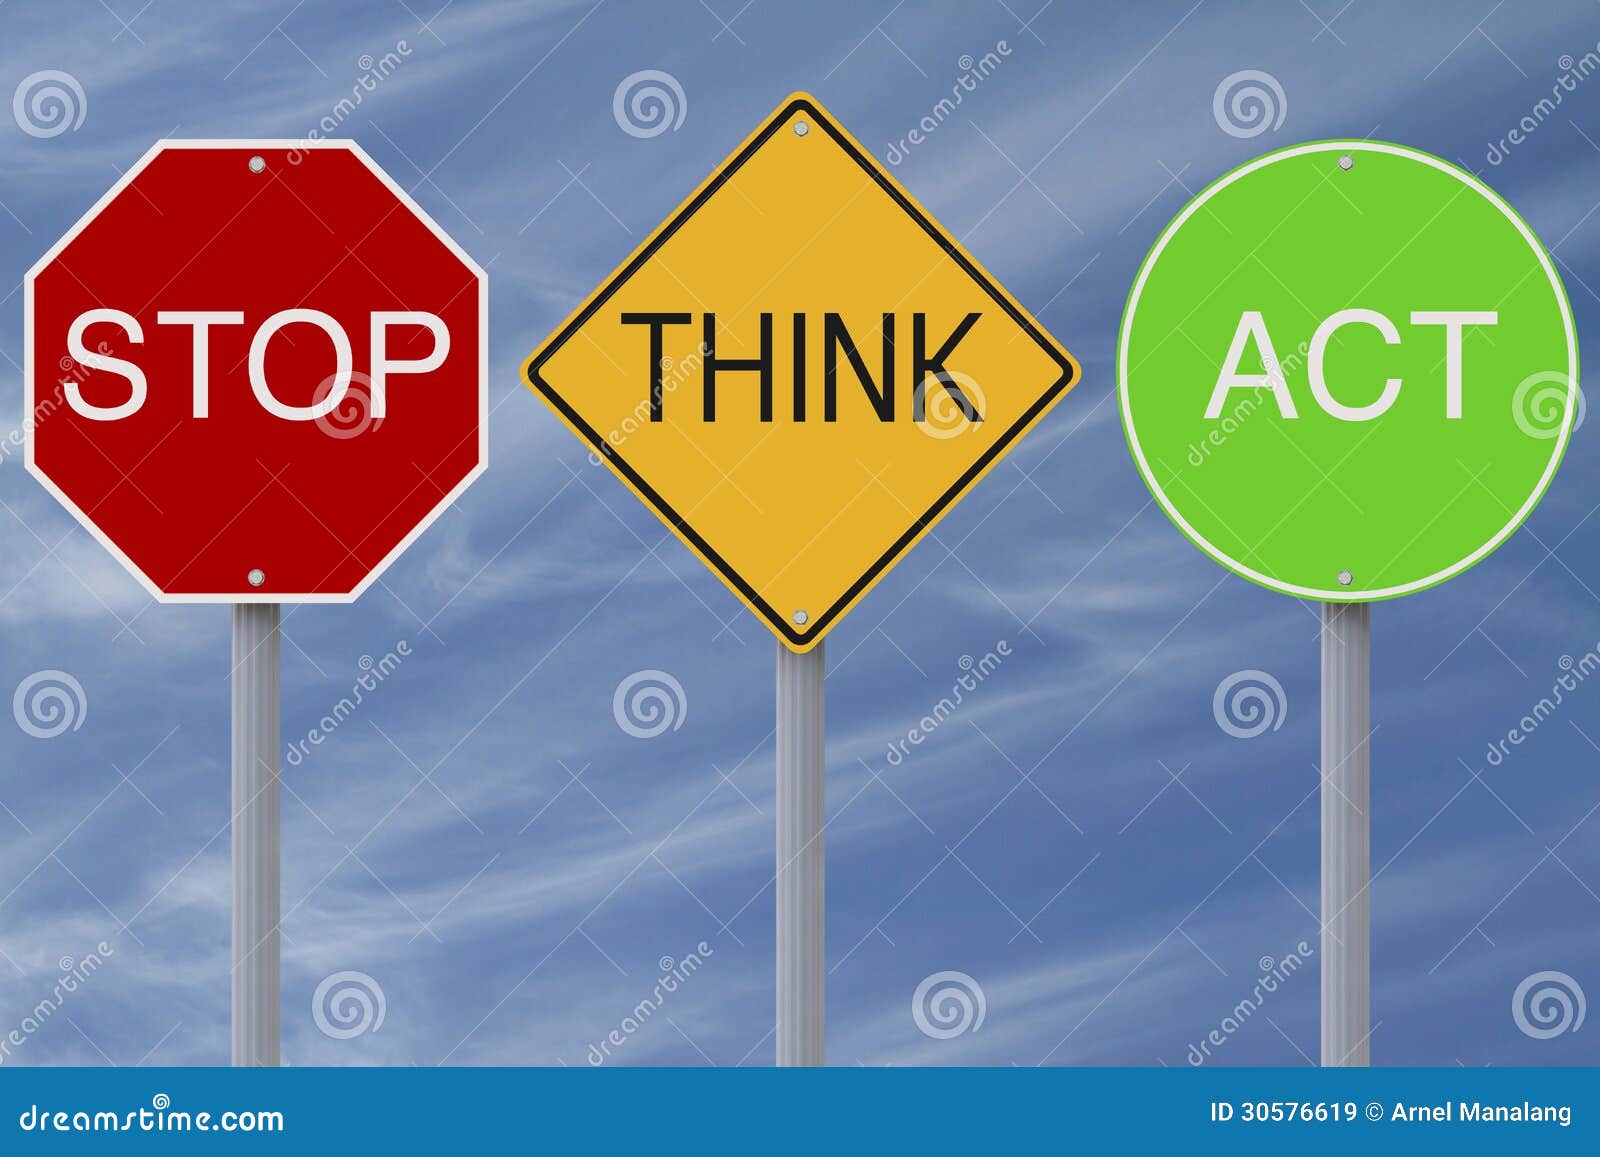 stop think act